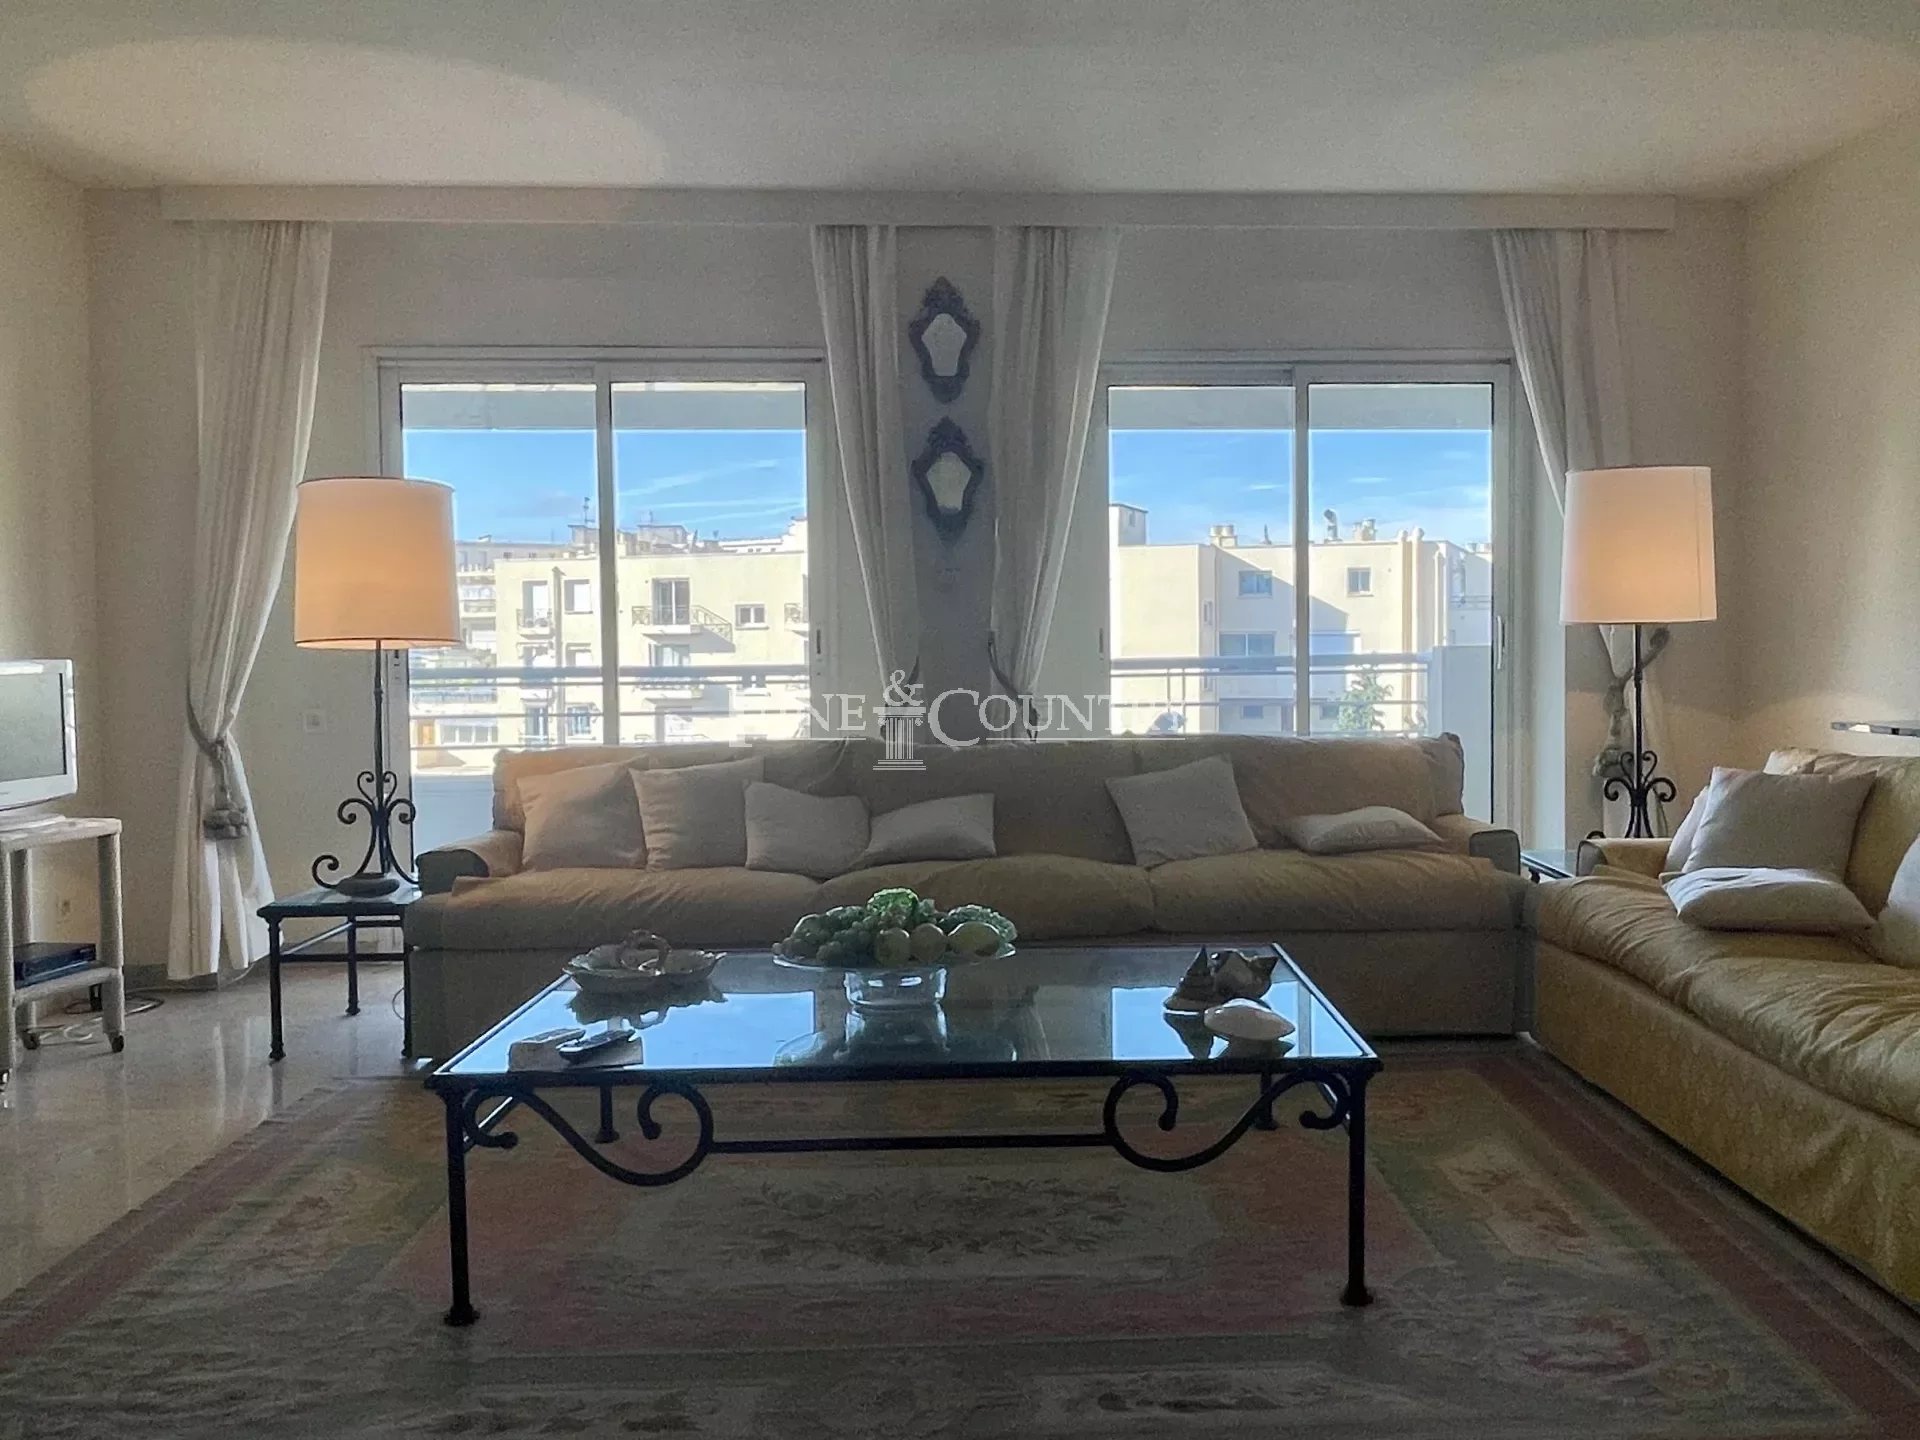 Apartement For Sale in Cannes with Pool